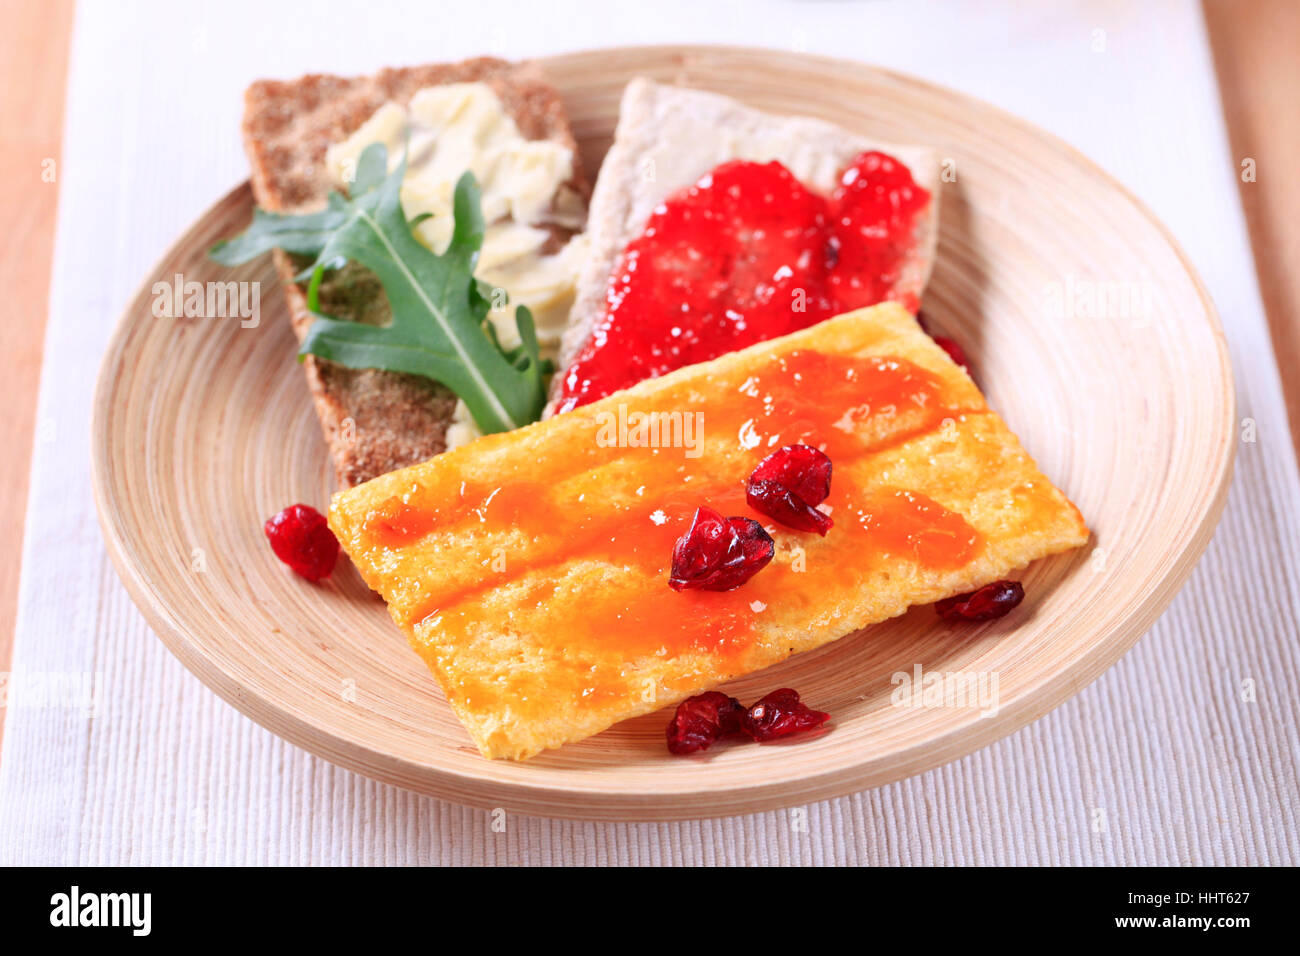 Various kinds of crispbread with jam Stock Photo